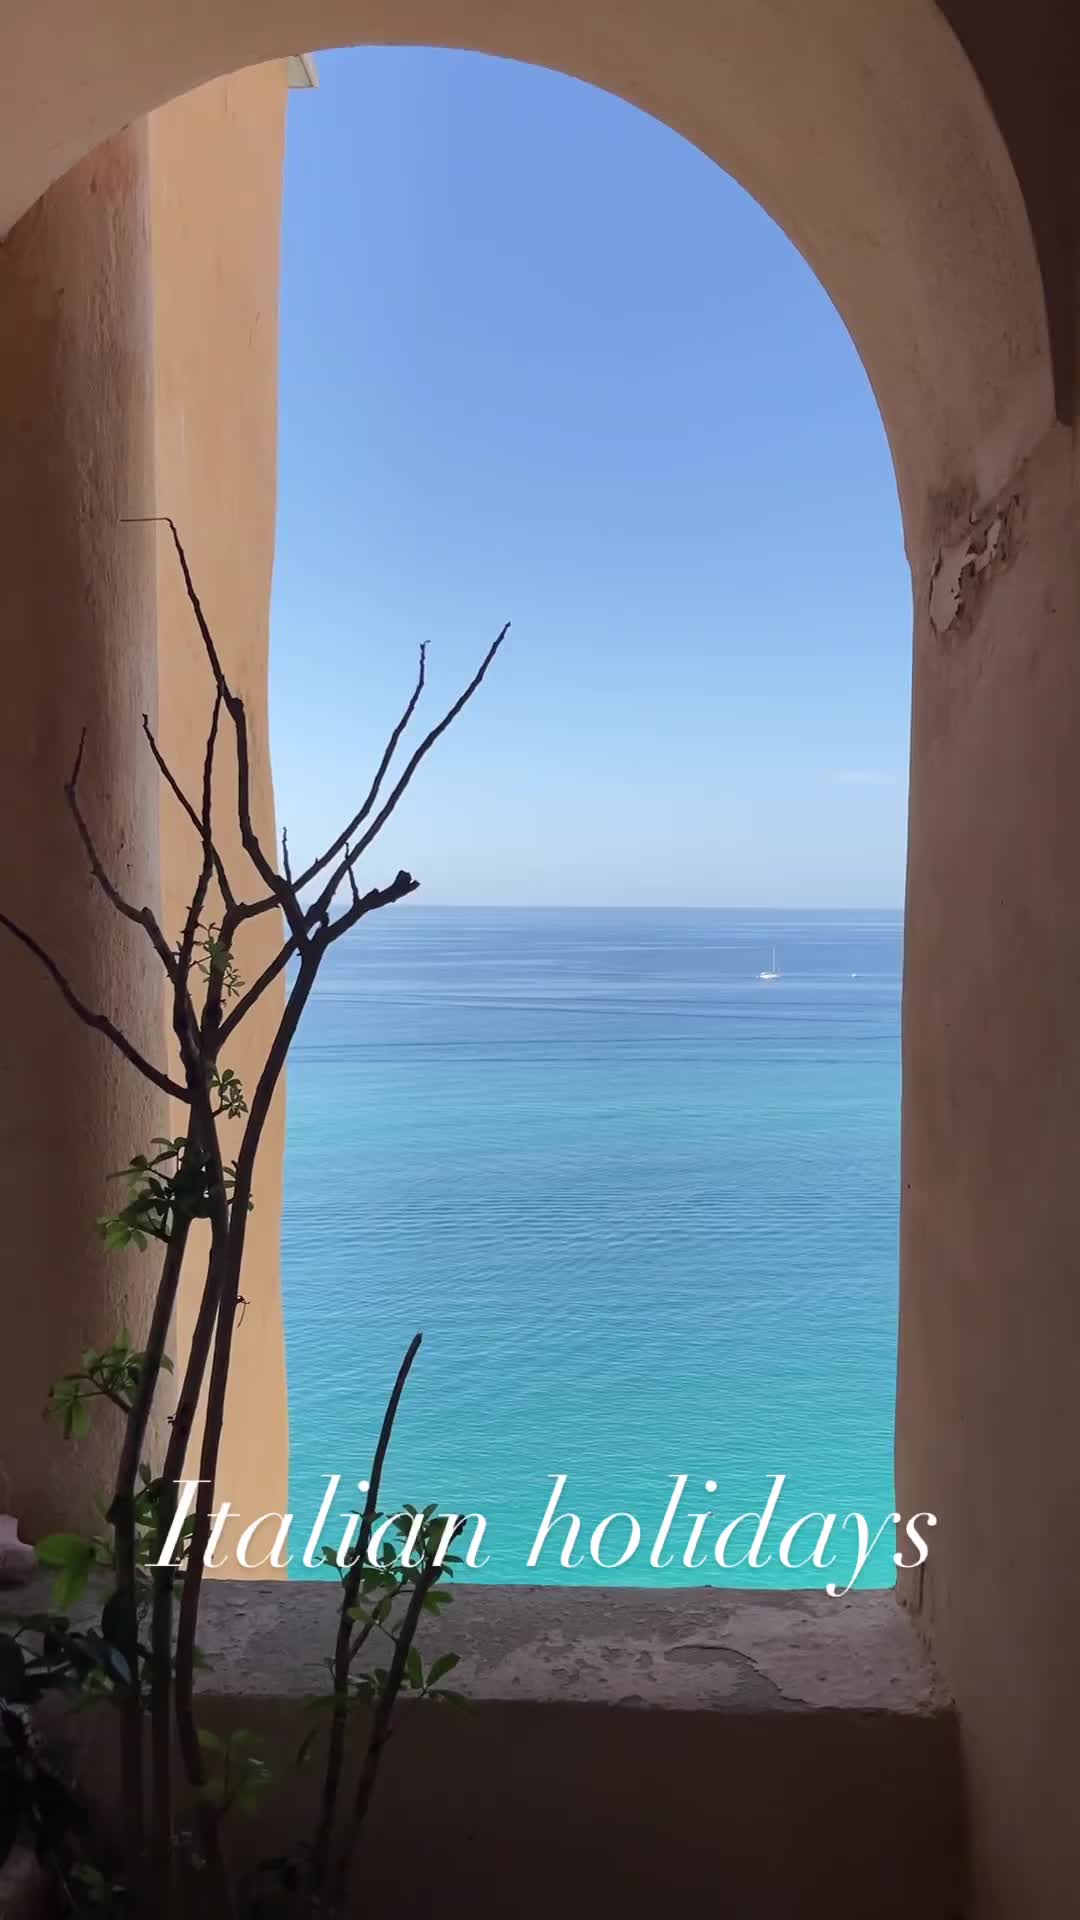 What’s your summer destination? 🇮🇹☀️🌊

📍Tropea Calabria 

🎥 @go_italy_ 

#tropea #calabria #italy #travel #sea #italia #summer #beach #instagood #nature #love #photooftheday #holiday #mare #calabriadaamare #photography #picoftheday #sun #sunset #landscape #beautiful #food #photo #tropeabeach #travelgram #cosenza #travelphotography #reggiocalabria #goodmorning